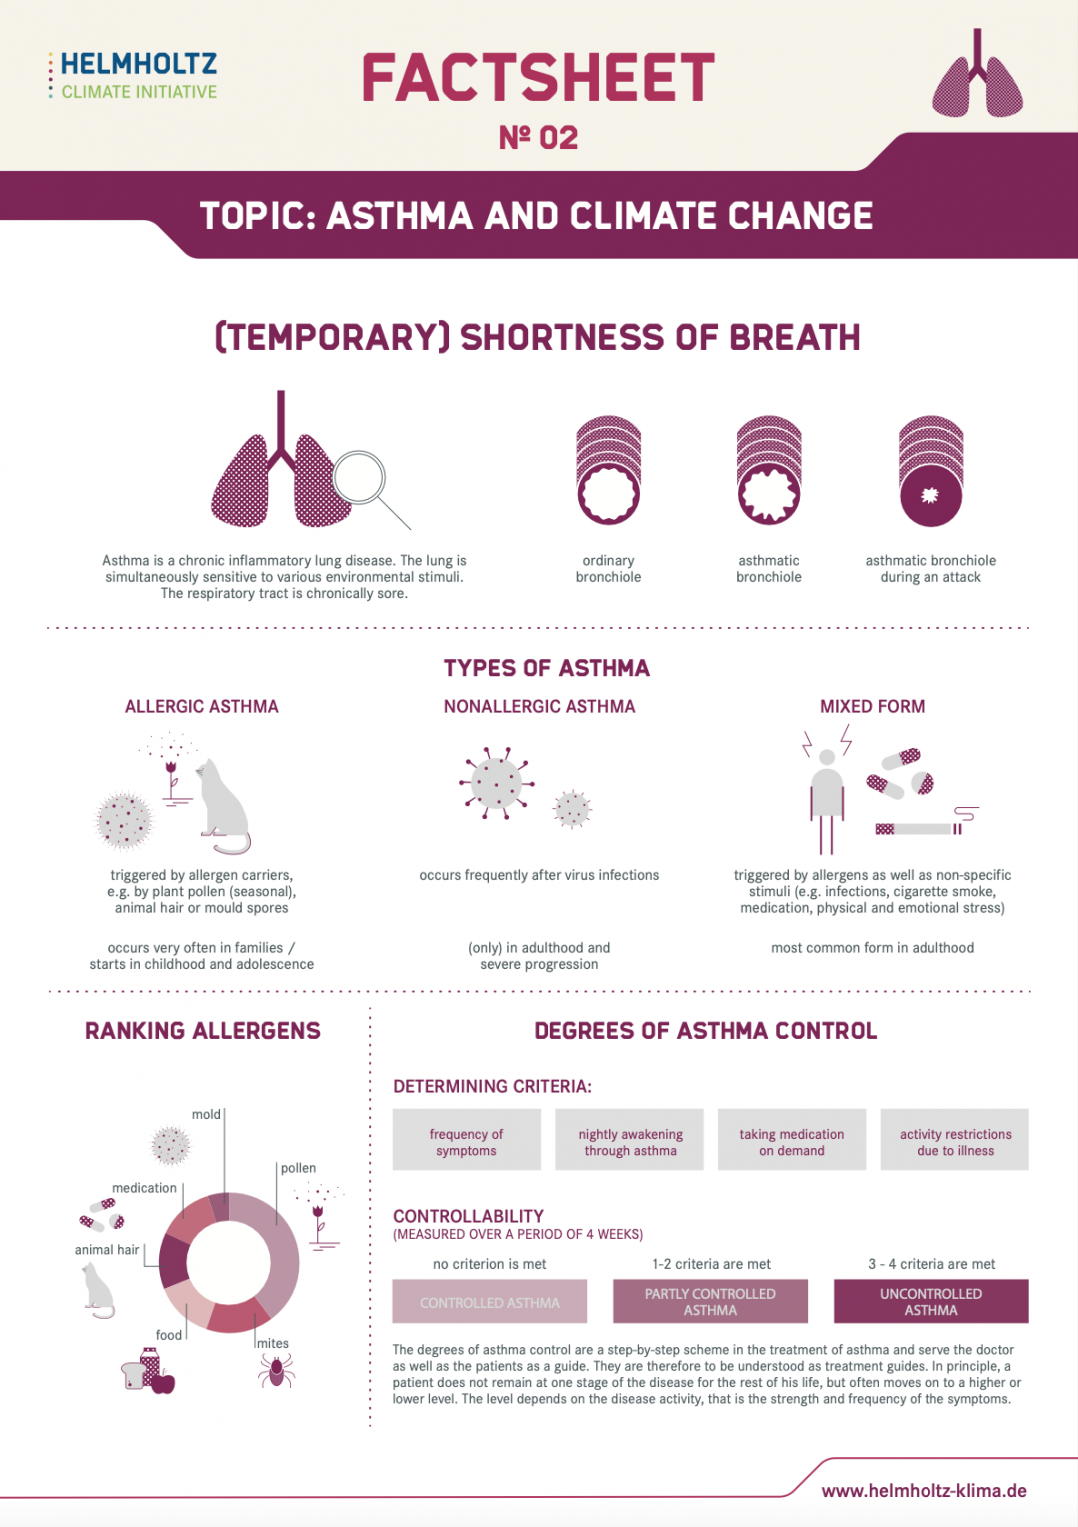 Download Factsheet Asthma and Climate Change